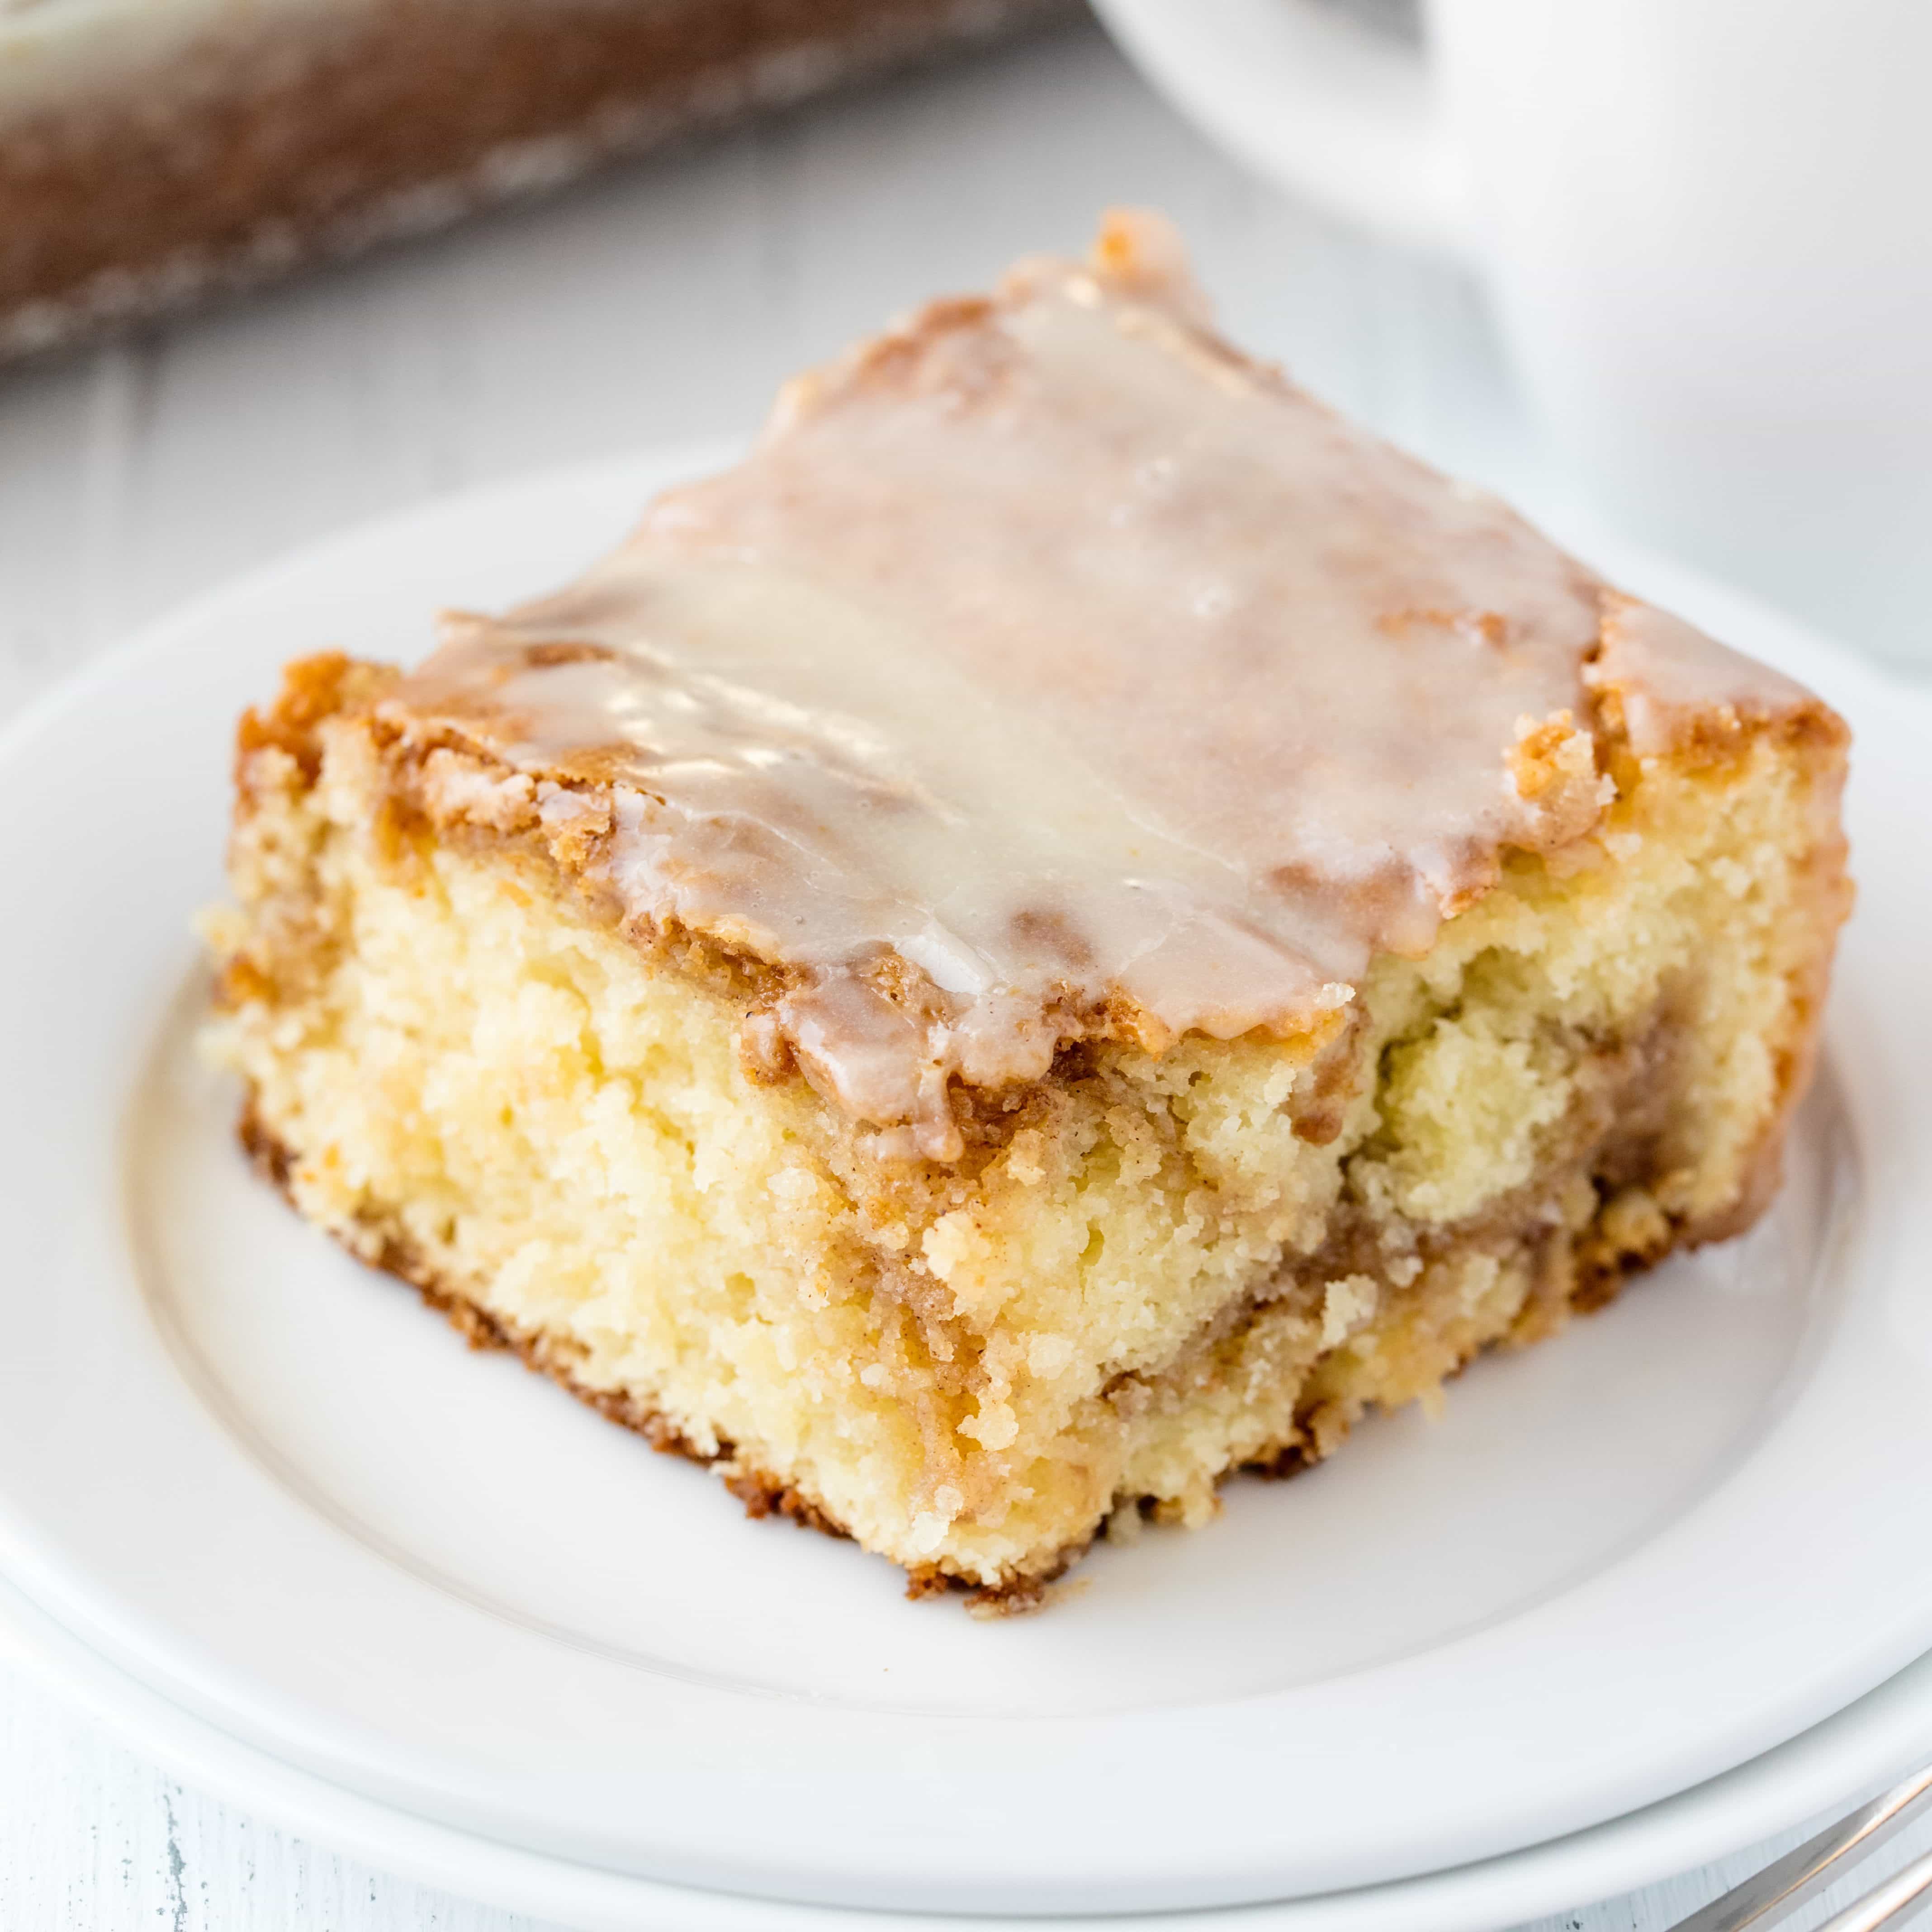 This super moist Cinnamon Roll Swirl Coffee Cake is worth making from scratch! Rich, moist coffee cake is swirled with a cinnamon roll filling and topped off with a simple glaze. This cake is to die for!